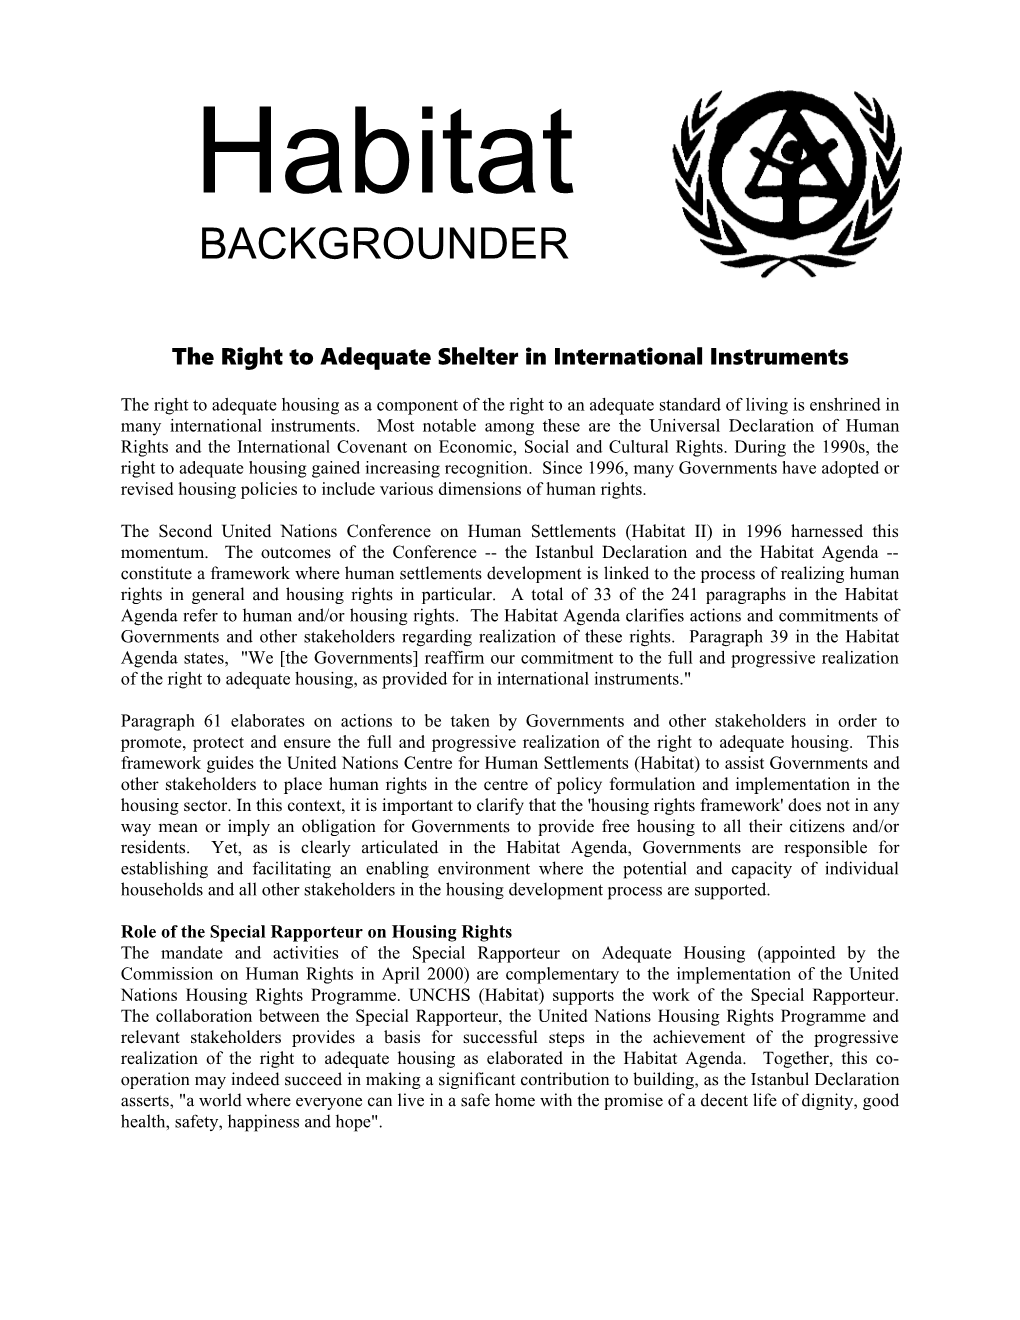 The Right to Adequate Shelter in International Instruments